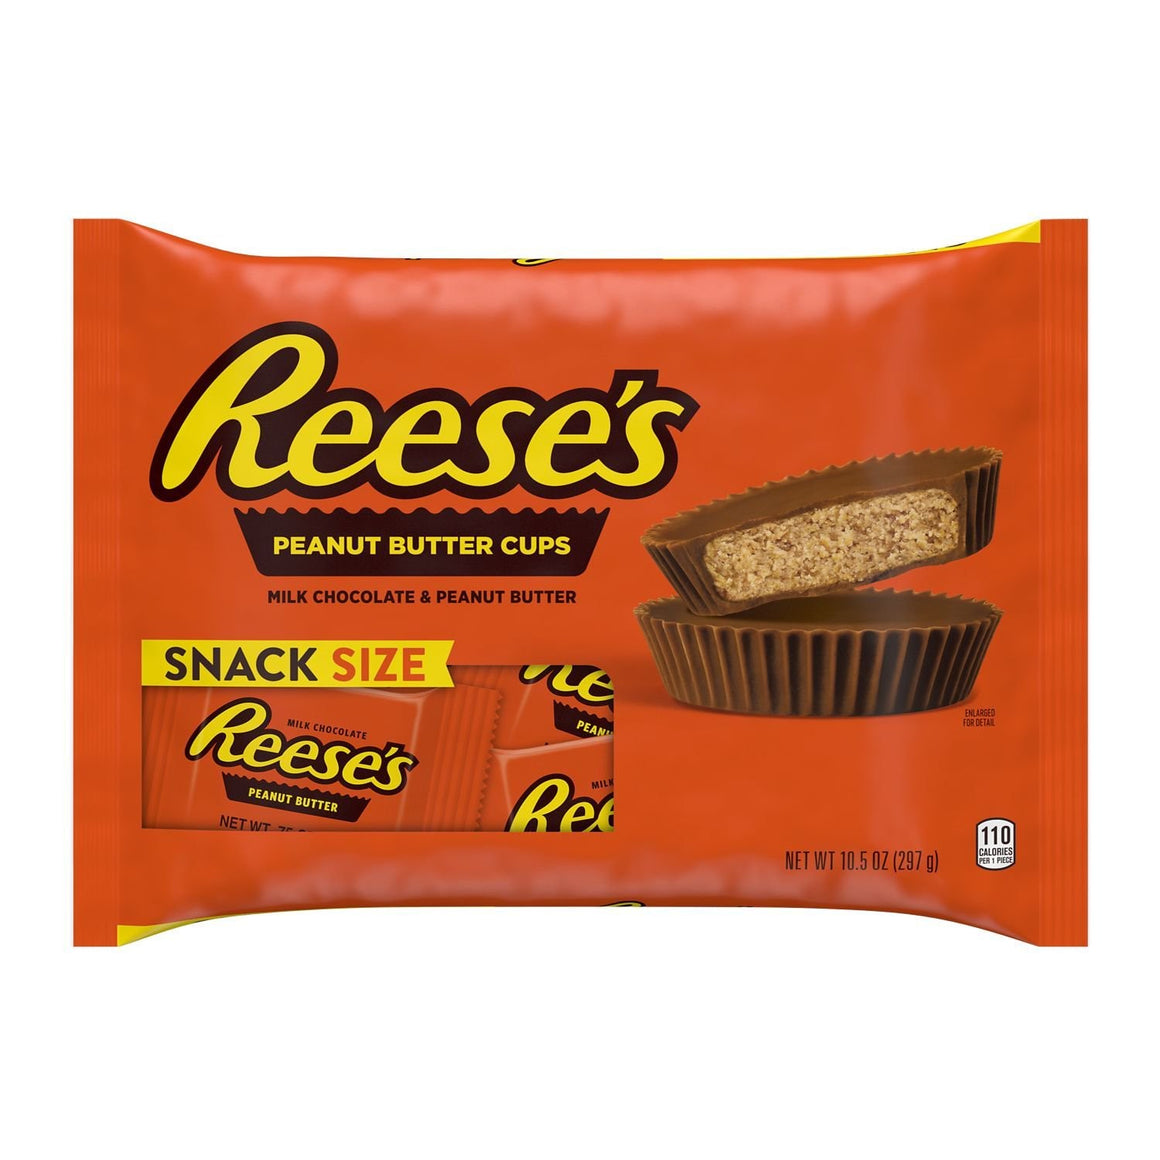 All City Candy Reese's Peanut Butter Cups Snack Size - 10.5-oz. Bag Candy Bars Hershey's For fresh candy and great service, visit www.allcitycandy.com